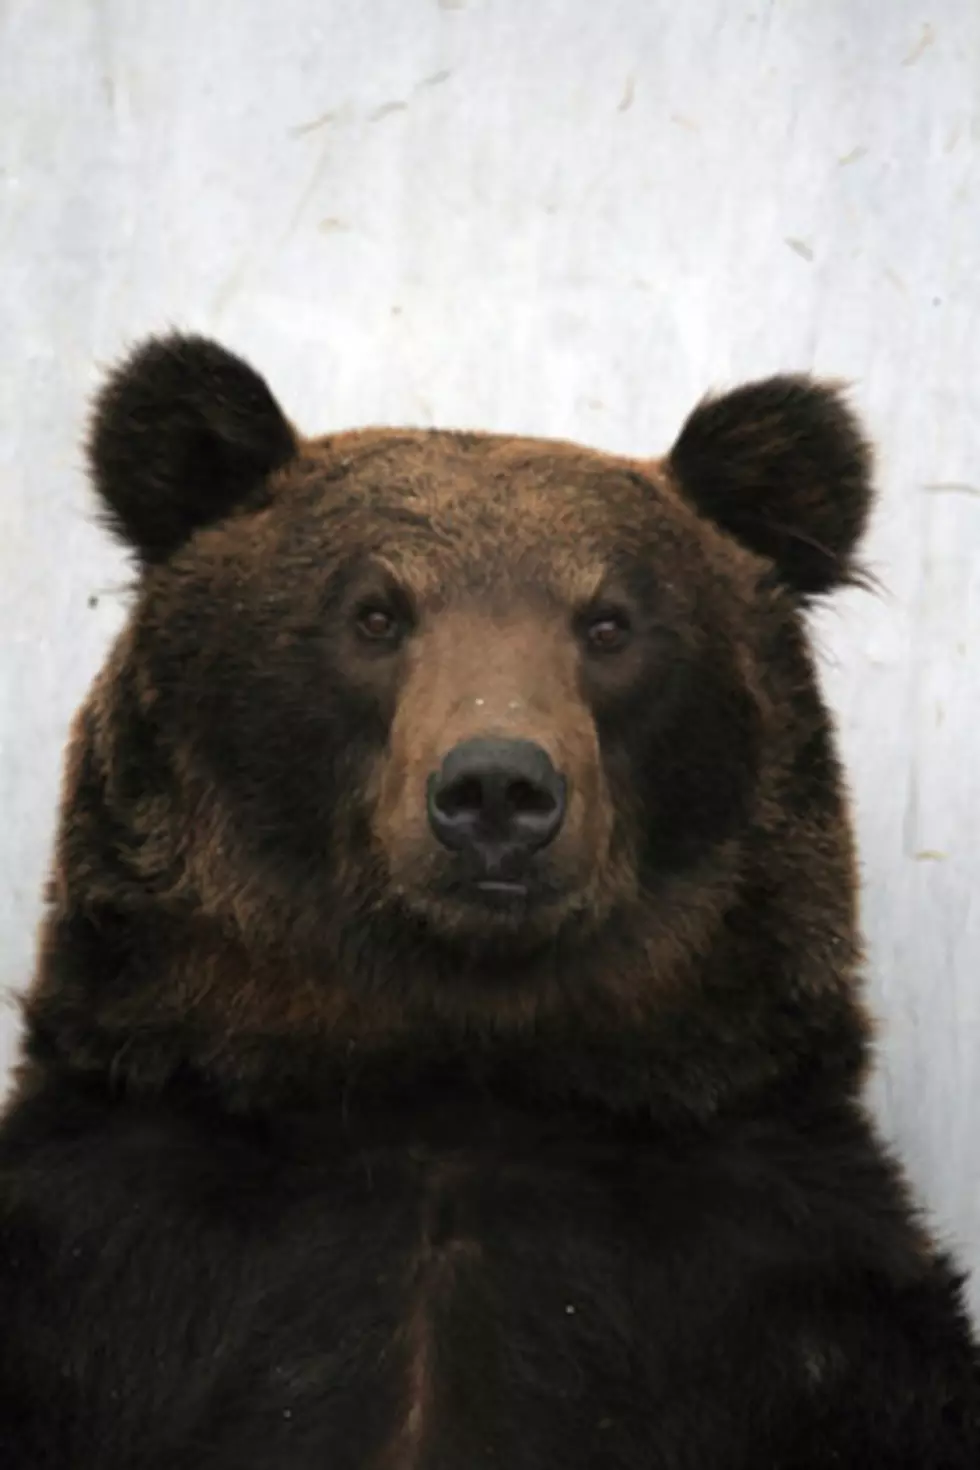 Group Sues to Reclassify Montana Bear Population